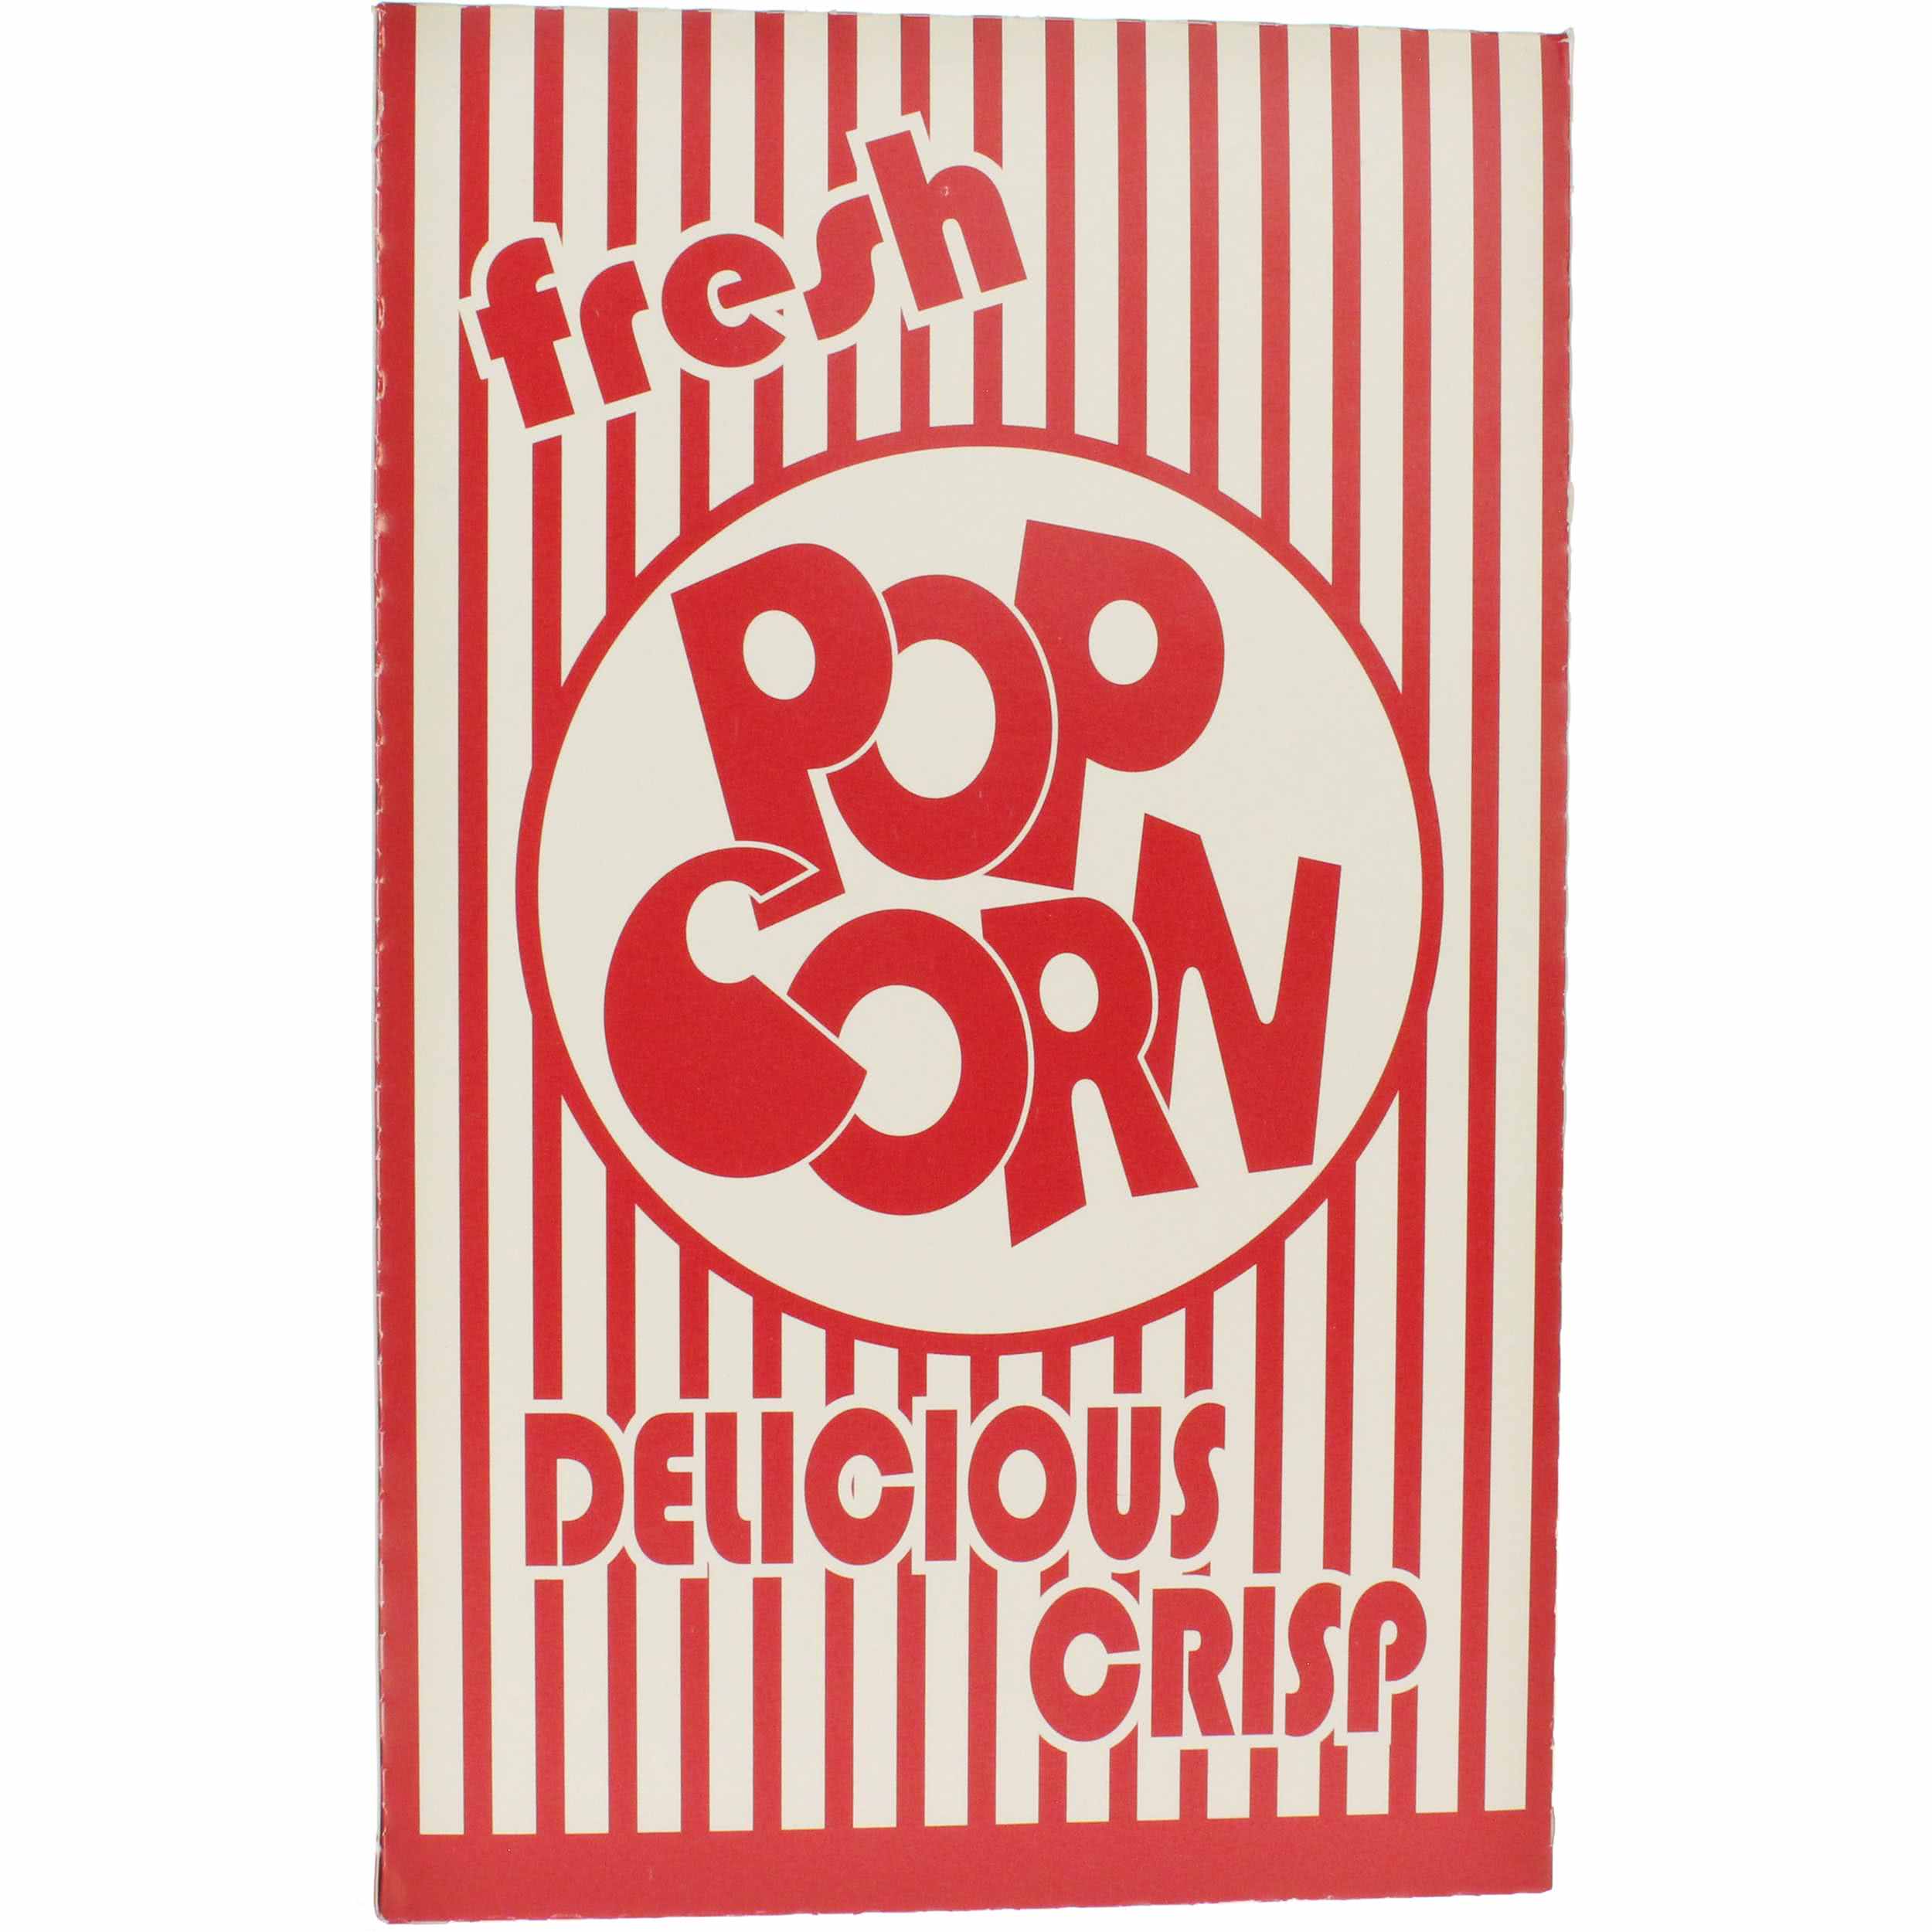 Boxes Logo - Closed Top Popcorn Boxes (Butter Popcorn)